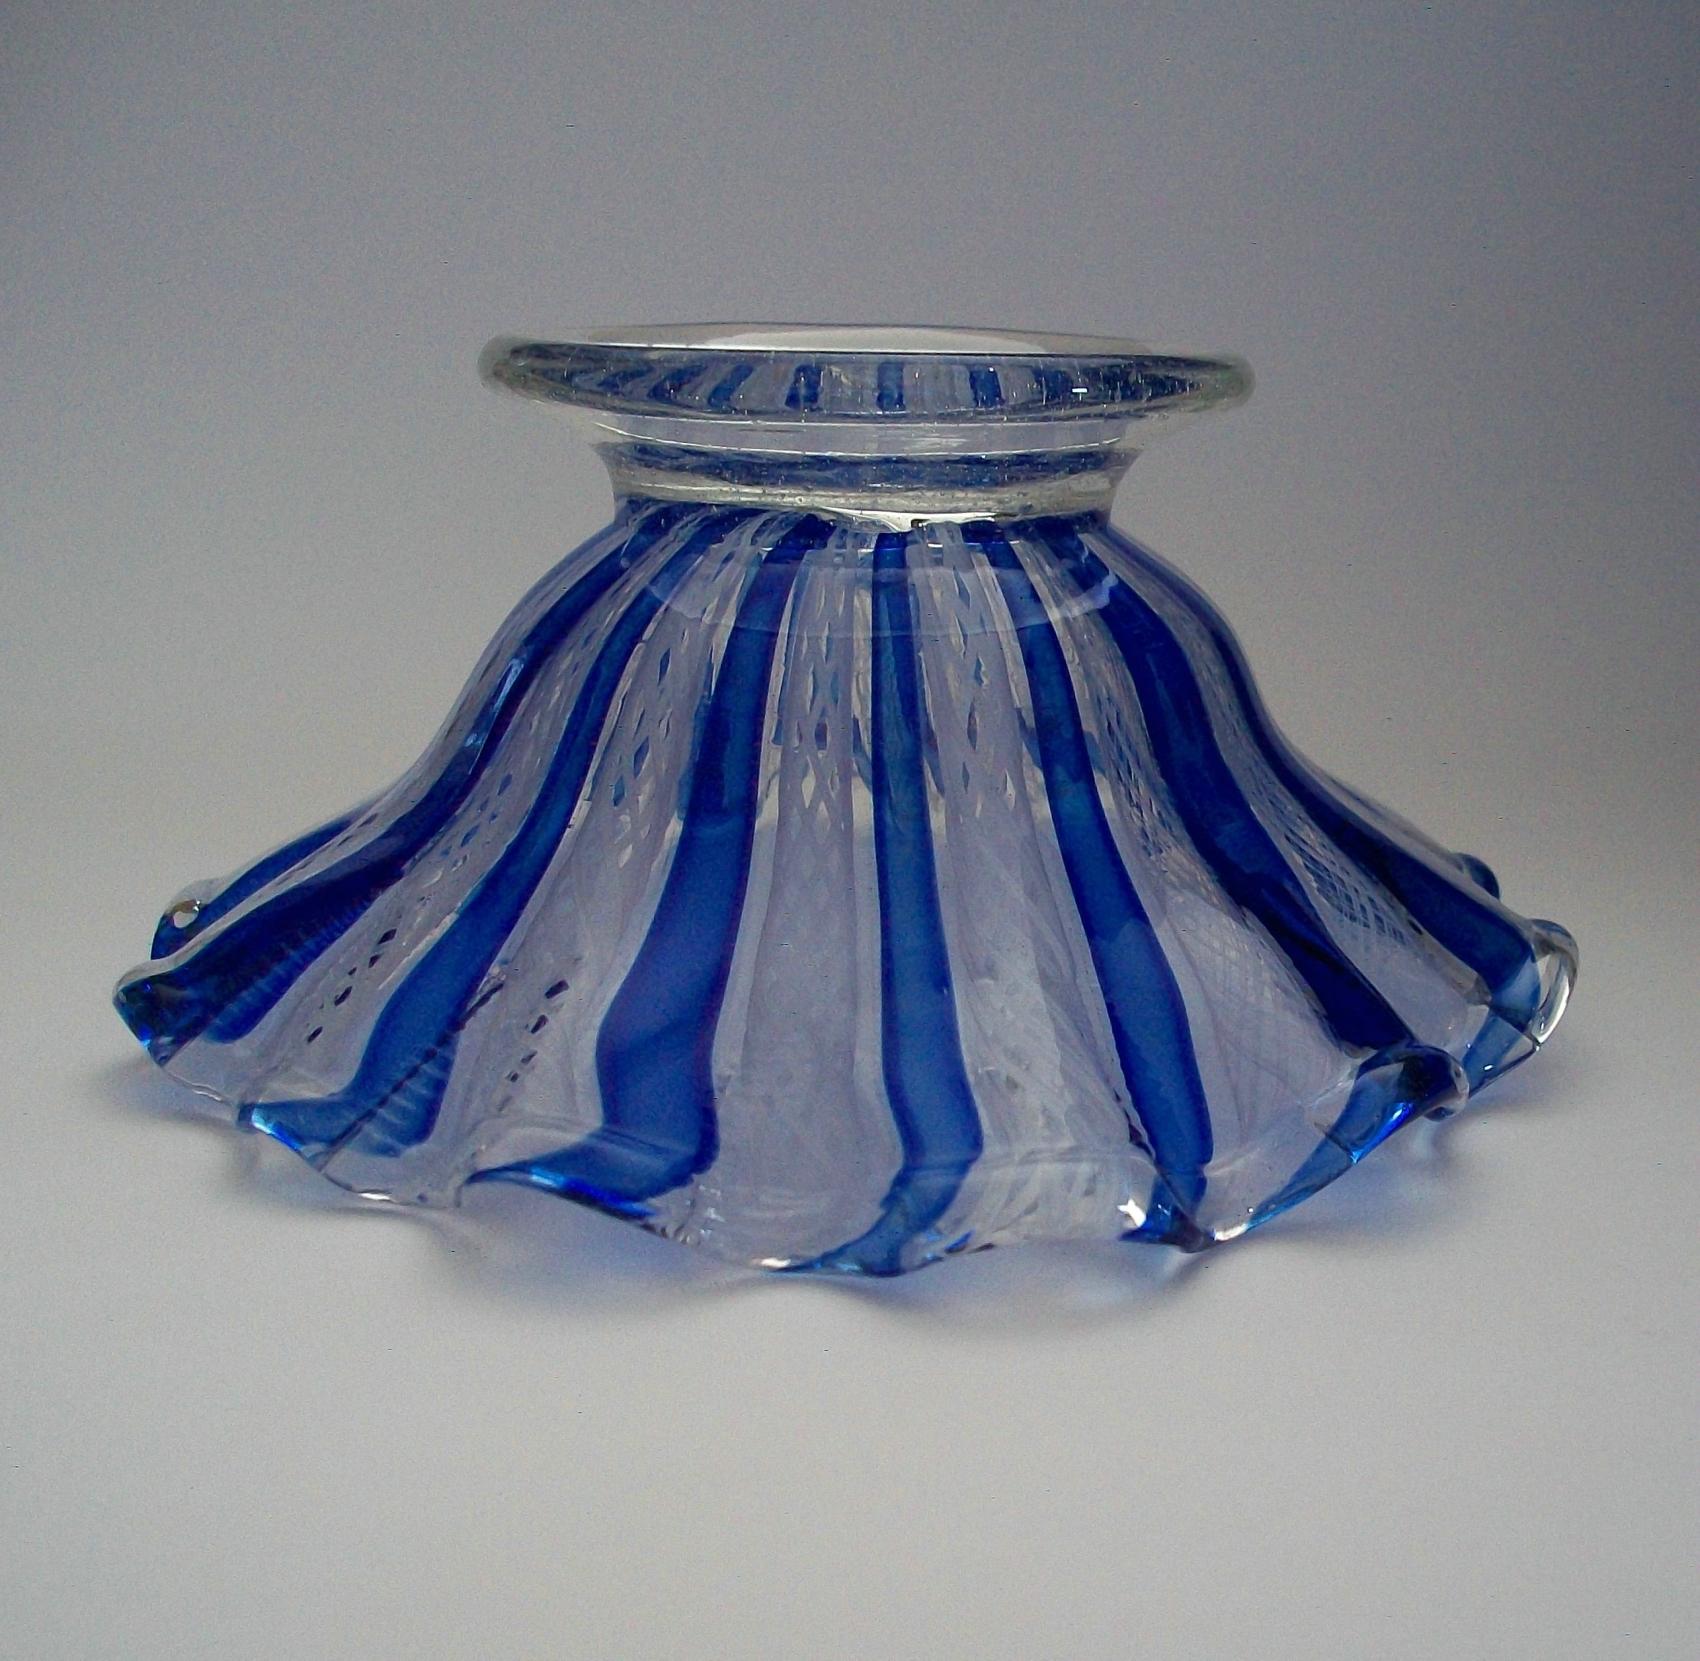 Murano Latticino & Blue Ribbon Footed Bowl - Unsigned - Italy - Mid 20th Century For Sale 2